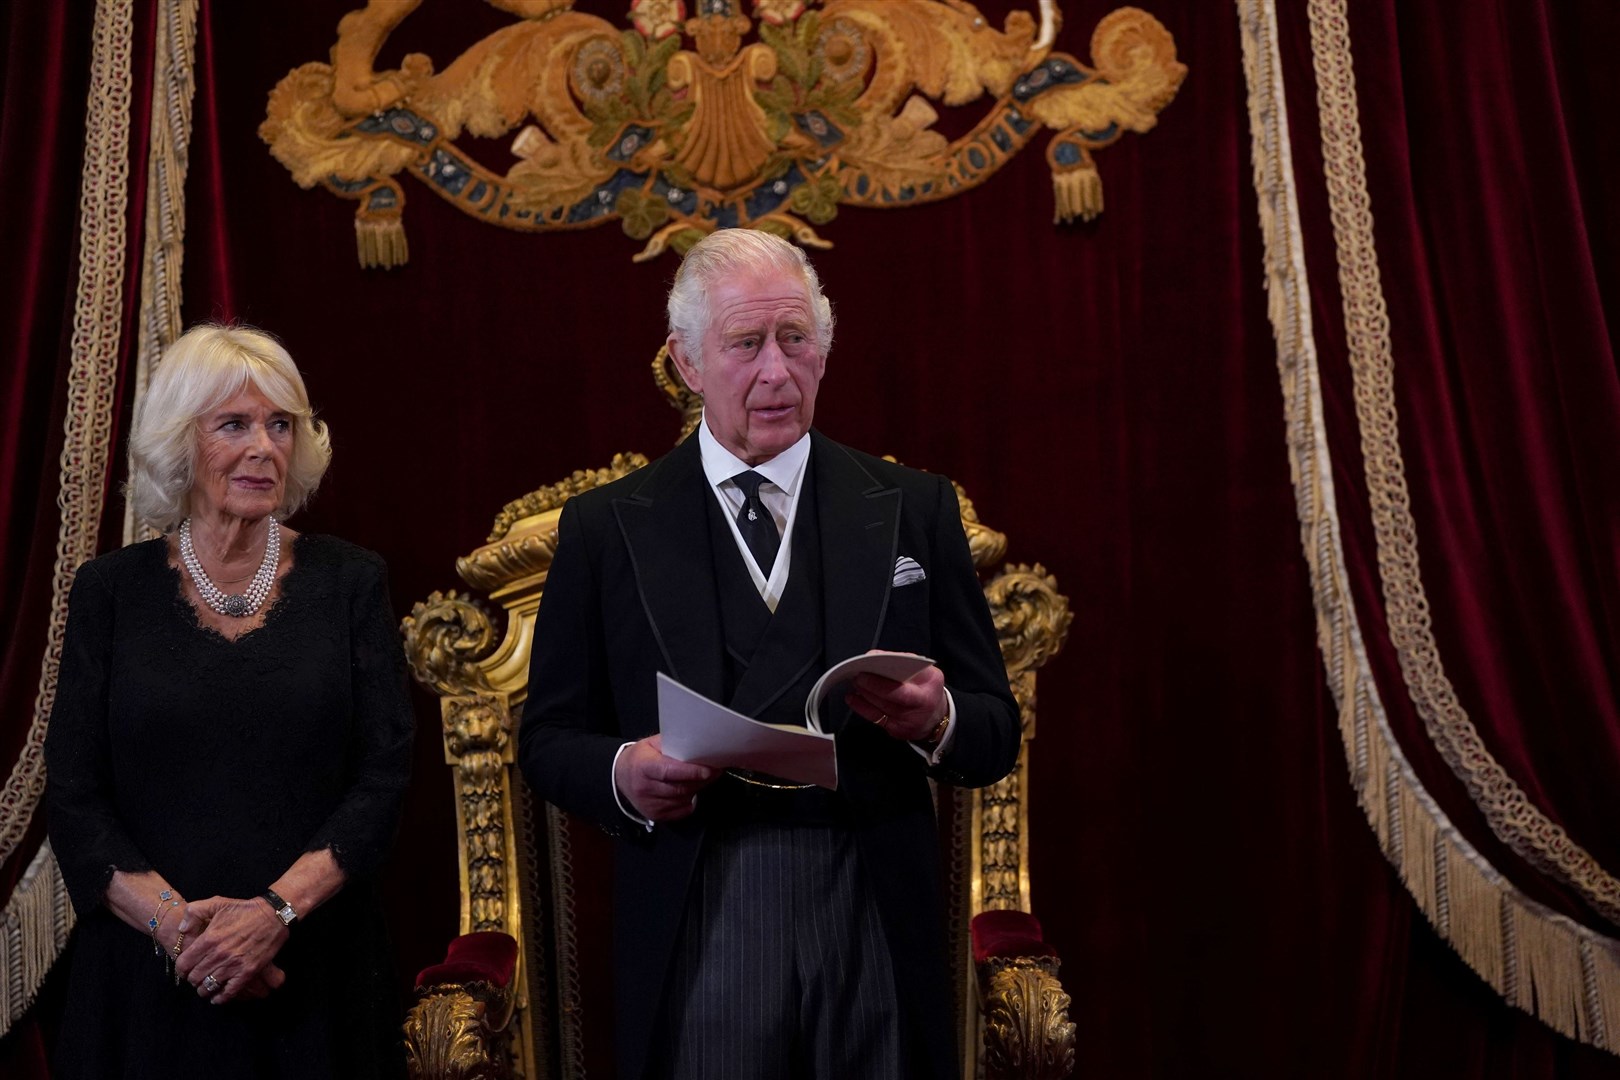 King Charles III and the Queen during the Accession Council at St James’s Palace, London (Victoria Jones/PA)